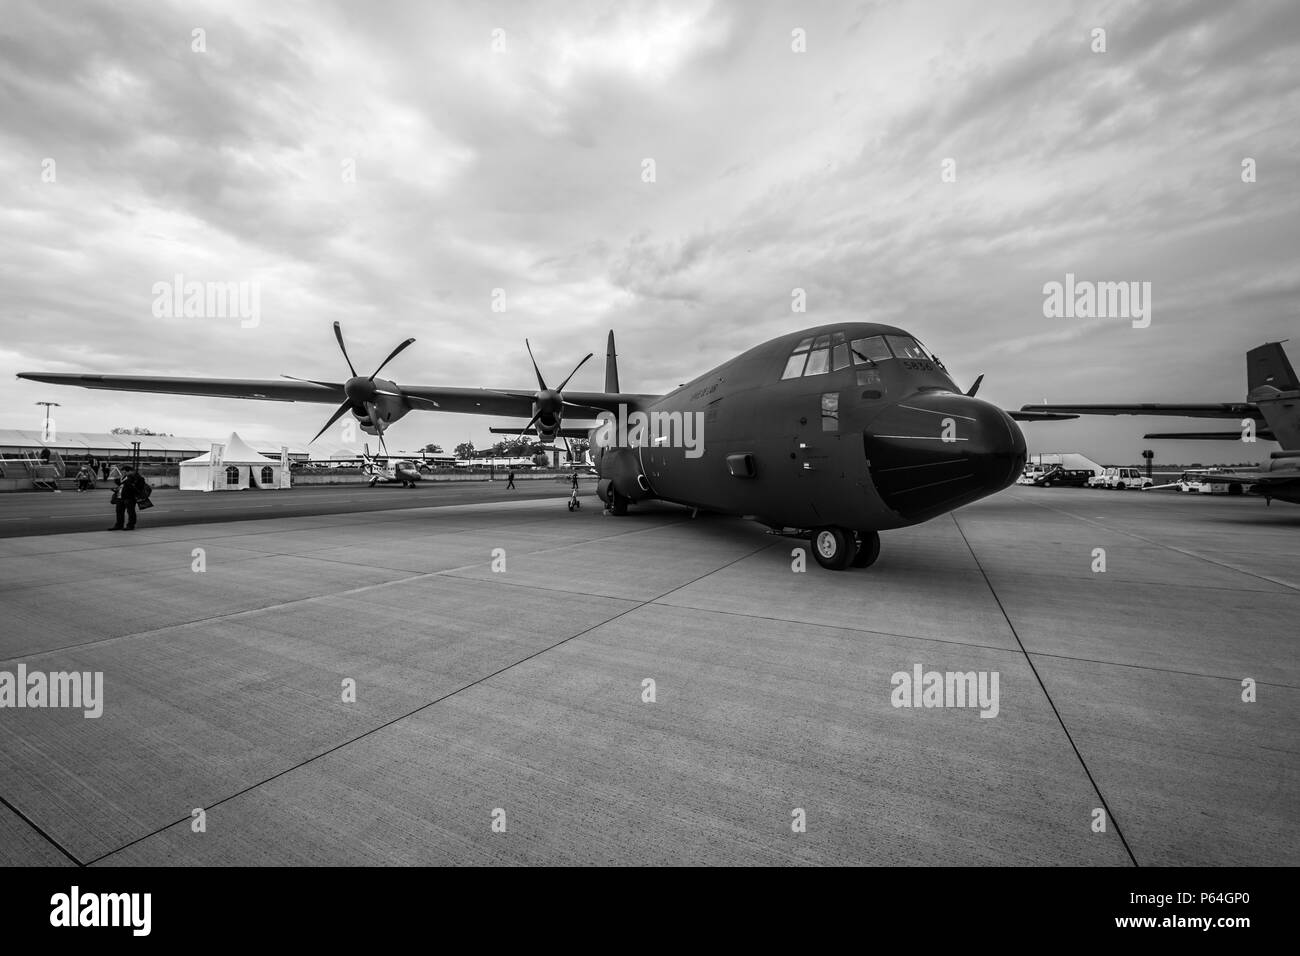 Military transport, aerial refueling Lockheed Martin C-130J Super Hercules. French Air Force. Black and white. Exhibition ILA Berlin Air Show 2018 Stock Photo